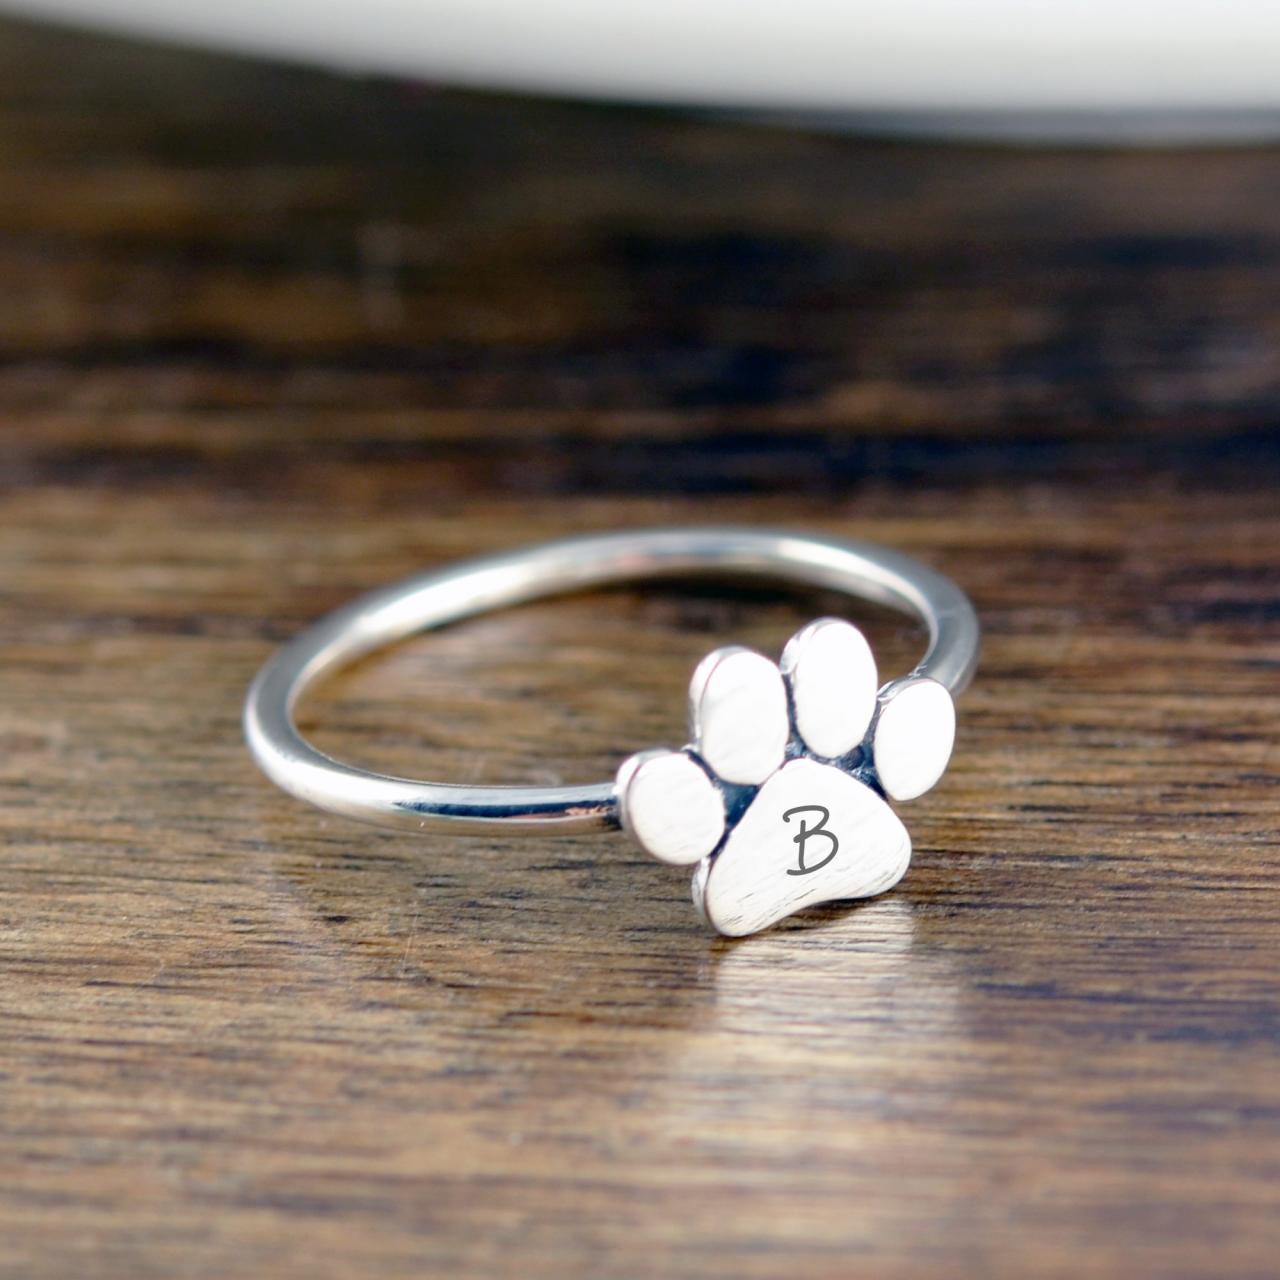 Dog Paw Initial Ring, Dog Paw Jewelry, Dog Paw Ring, Initial Jewelry, Personalized Ring, Dog Lover Gift, Dog Loss Gift, Gift For Her